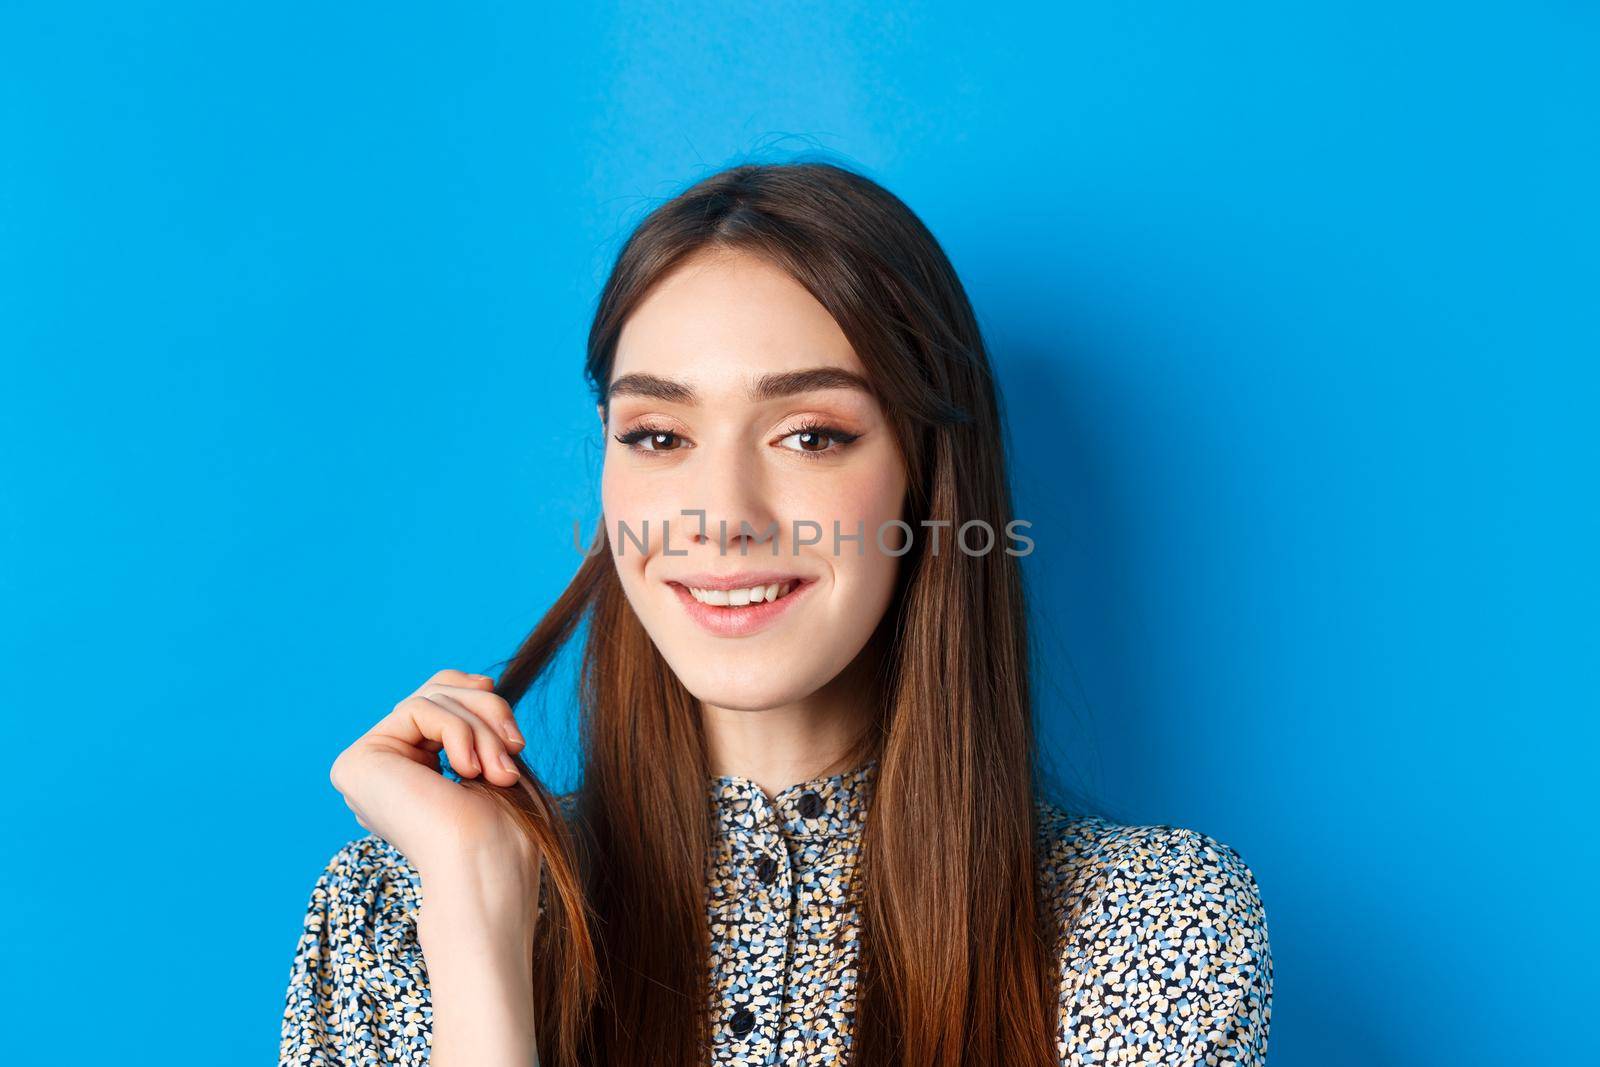 Close-up portrait of flirty young woman with natural beauty, smiling and playing with hair strand, having interesting idea, standing on blue background.